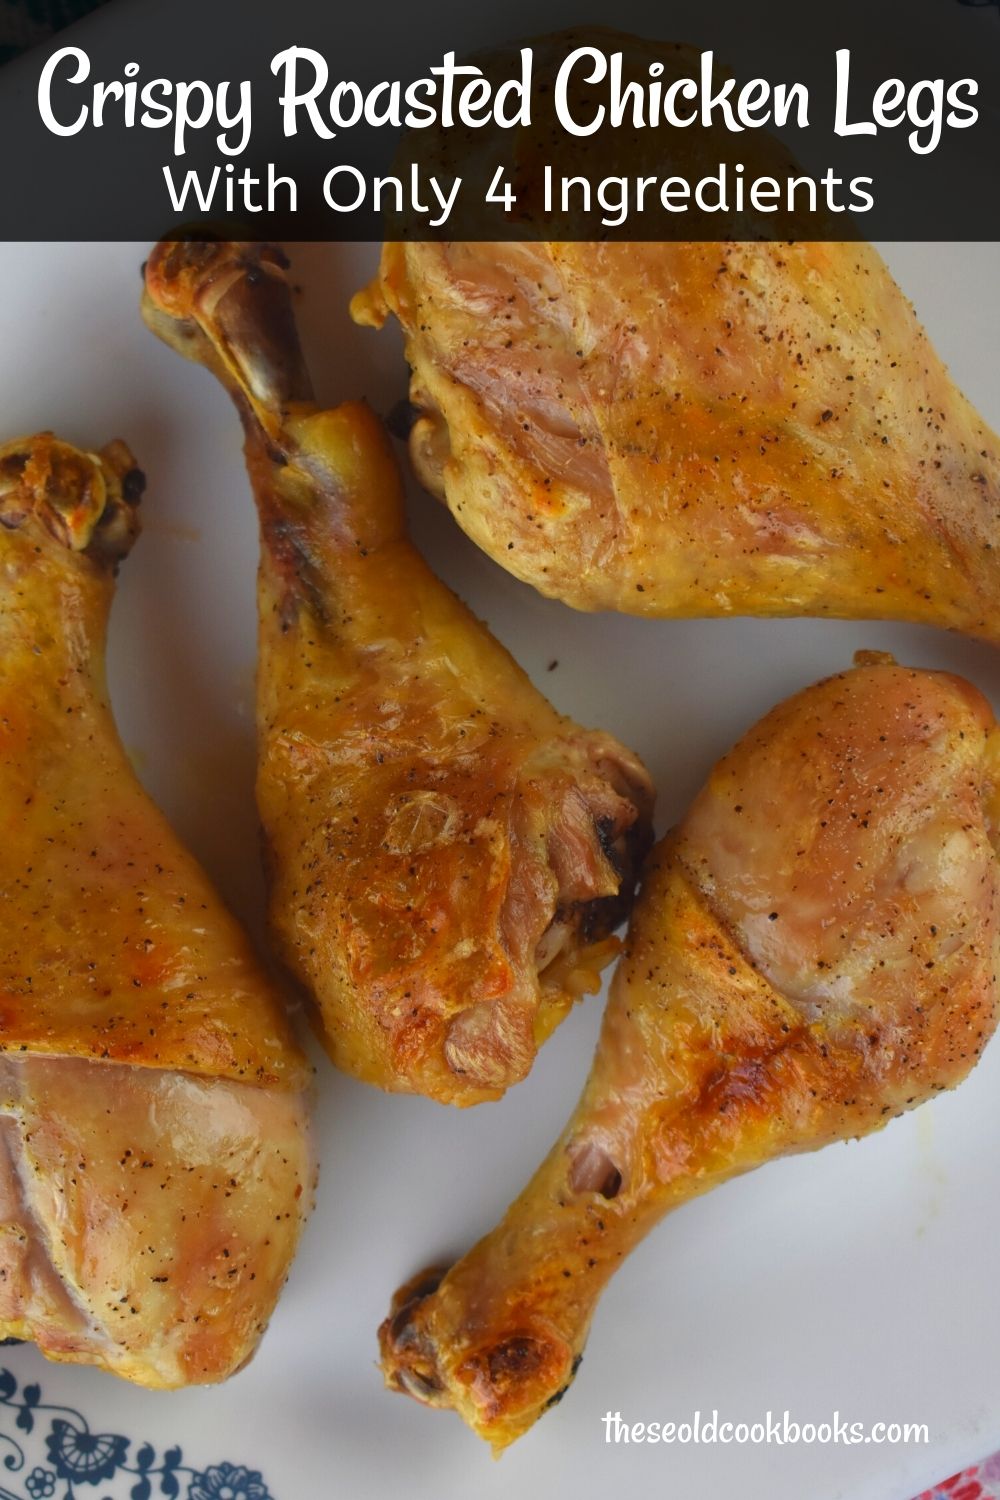 Need a quick and easy way to make your family happy? These 4-Ingredient Baked Chicken Legs are easy to make and turn out tender and juicy every time. Kids go crazy for these yummy chicken legs. These beauties are a great option when you are looking for a keto-friendly, low carb or gluten free option for dinner.